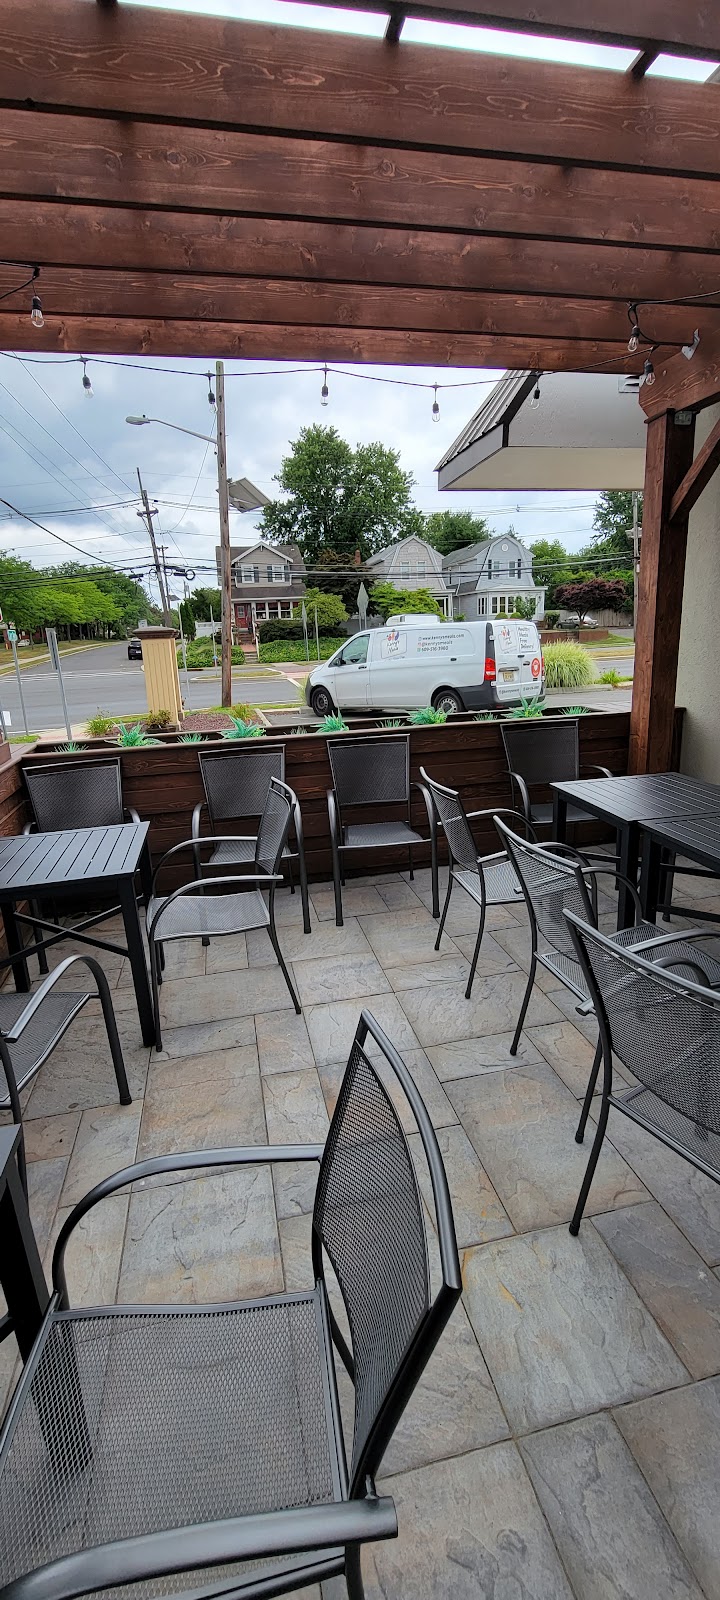 Crave Natures Eatery | 1891 Brunswick Ave, Lawrence Township, NJ 08648 | Phone: (609) 483-3600